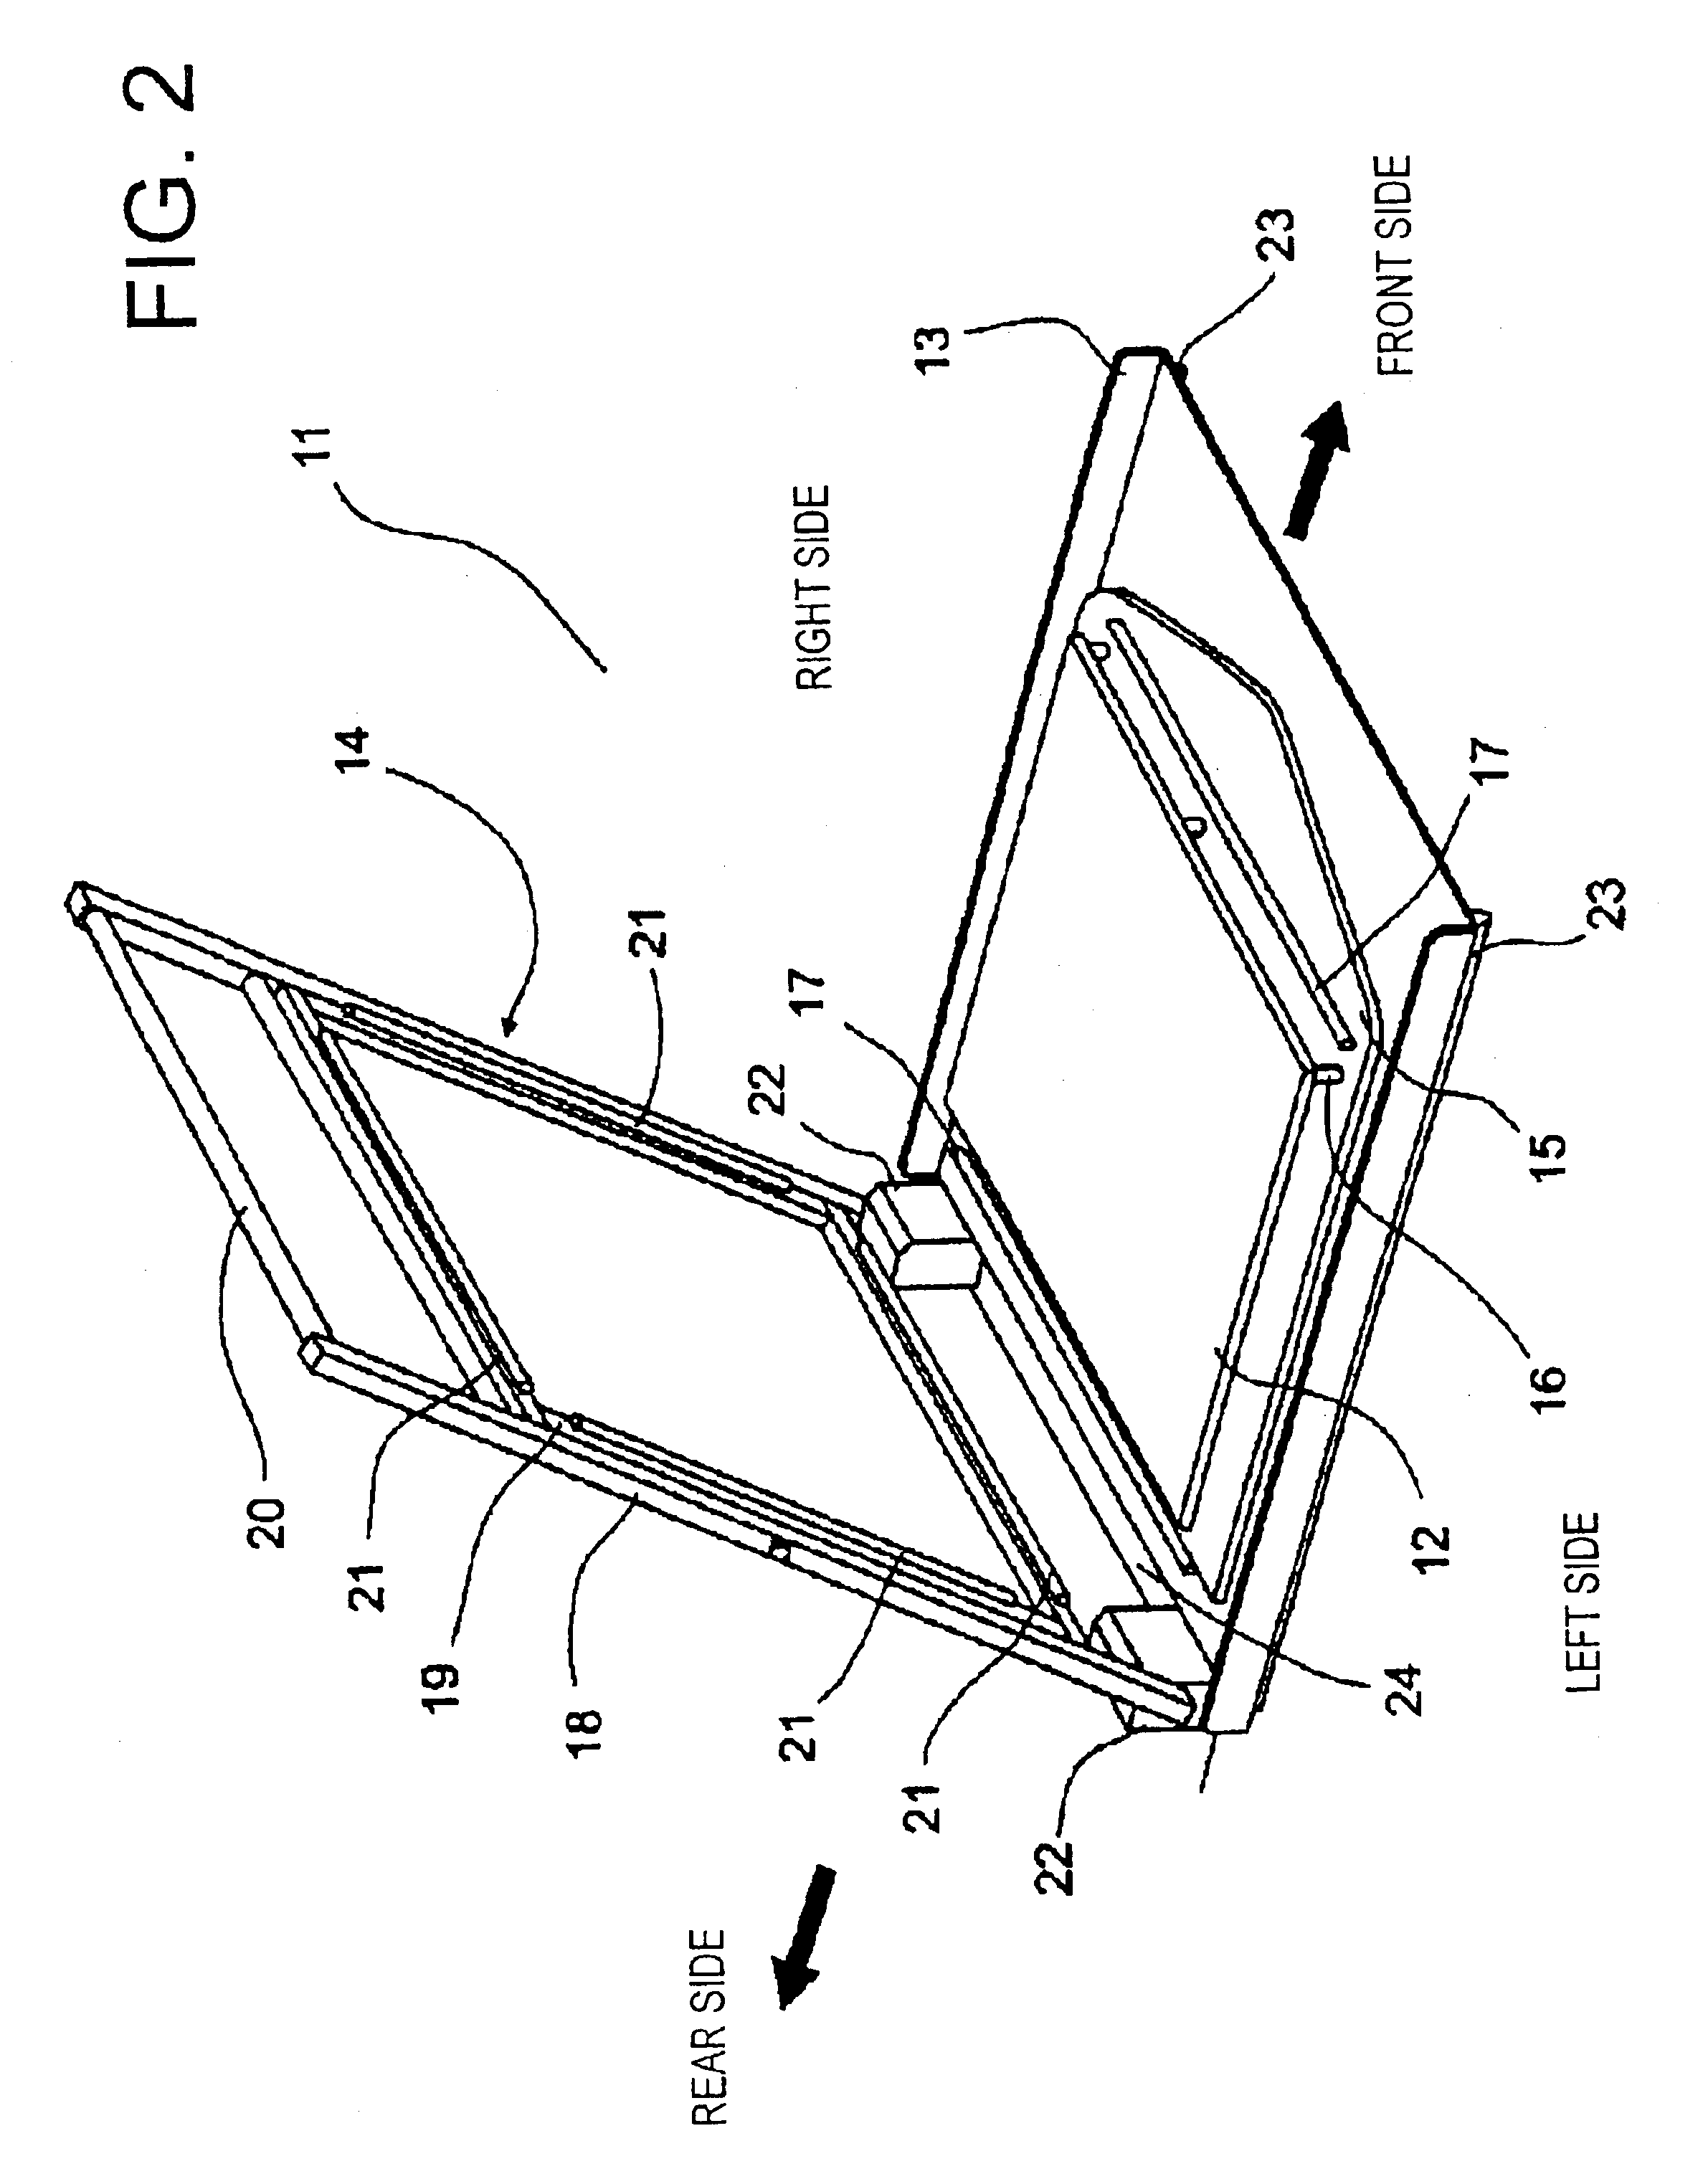 Platen device for holding workpiece in ink-jet printer